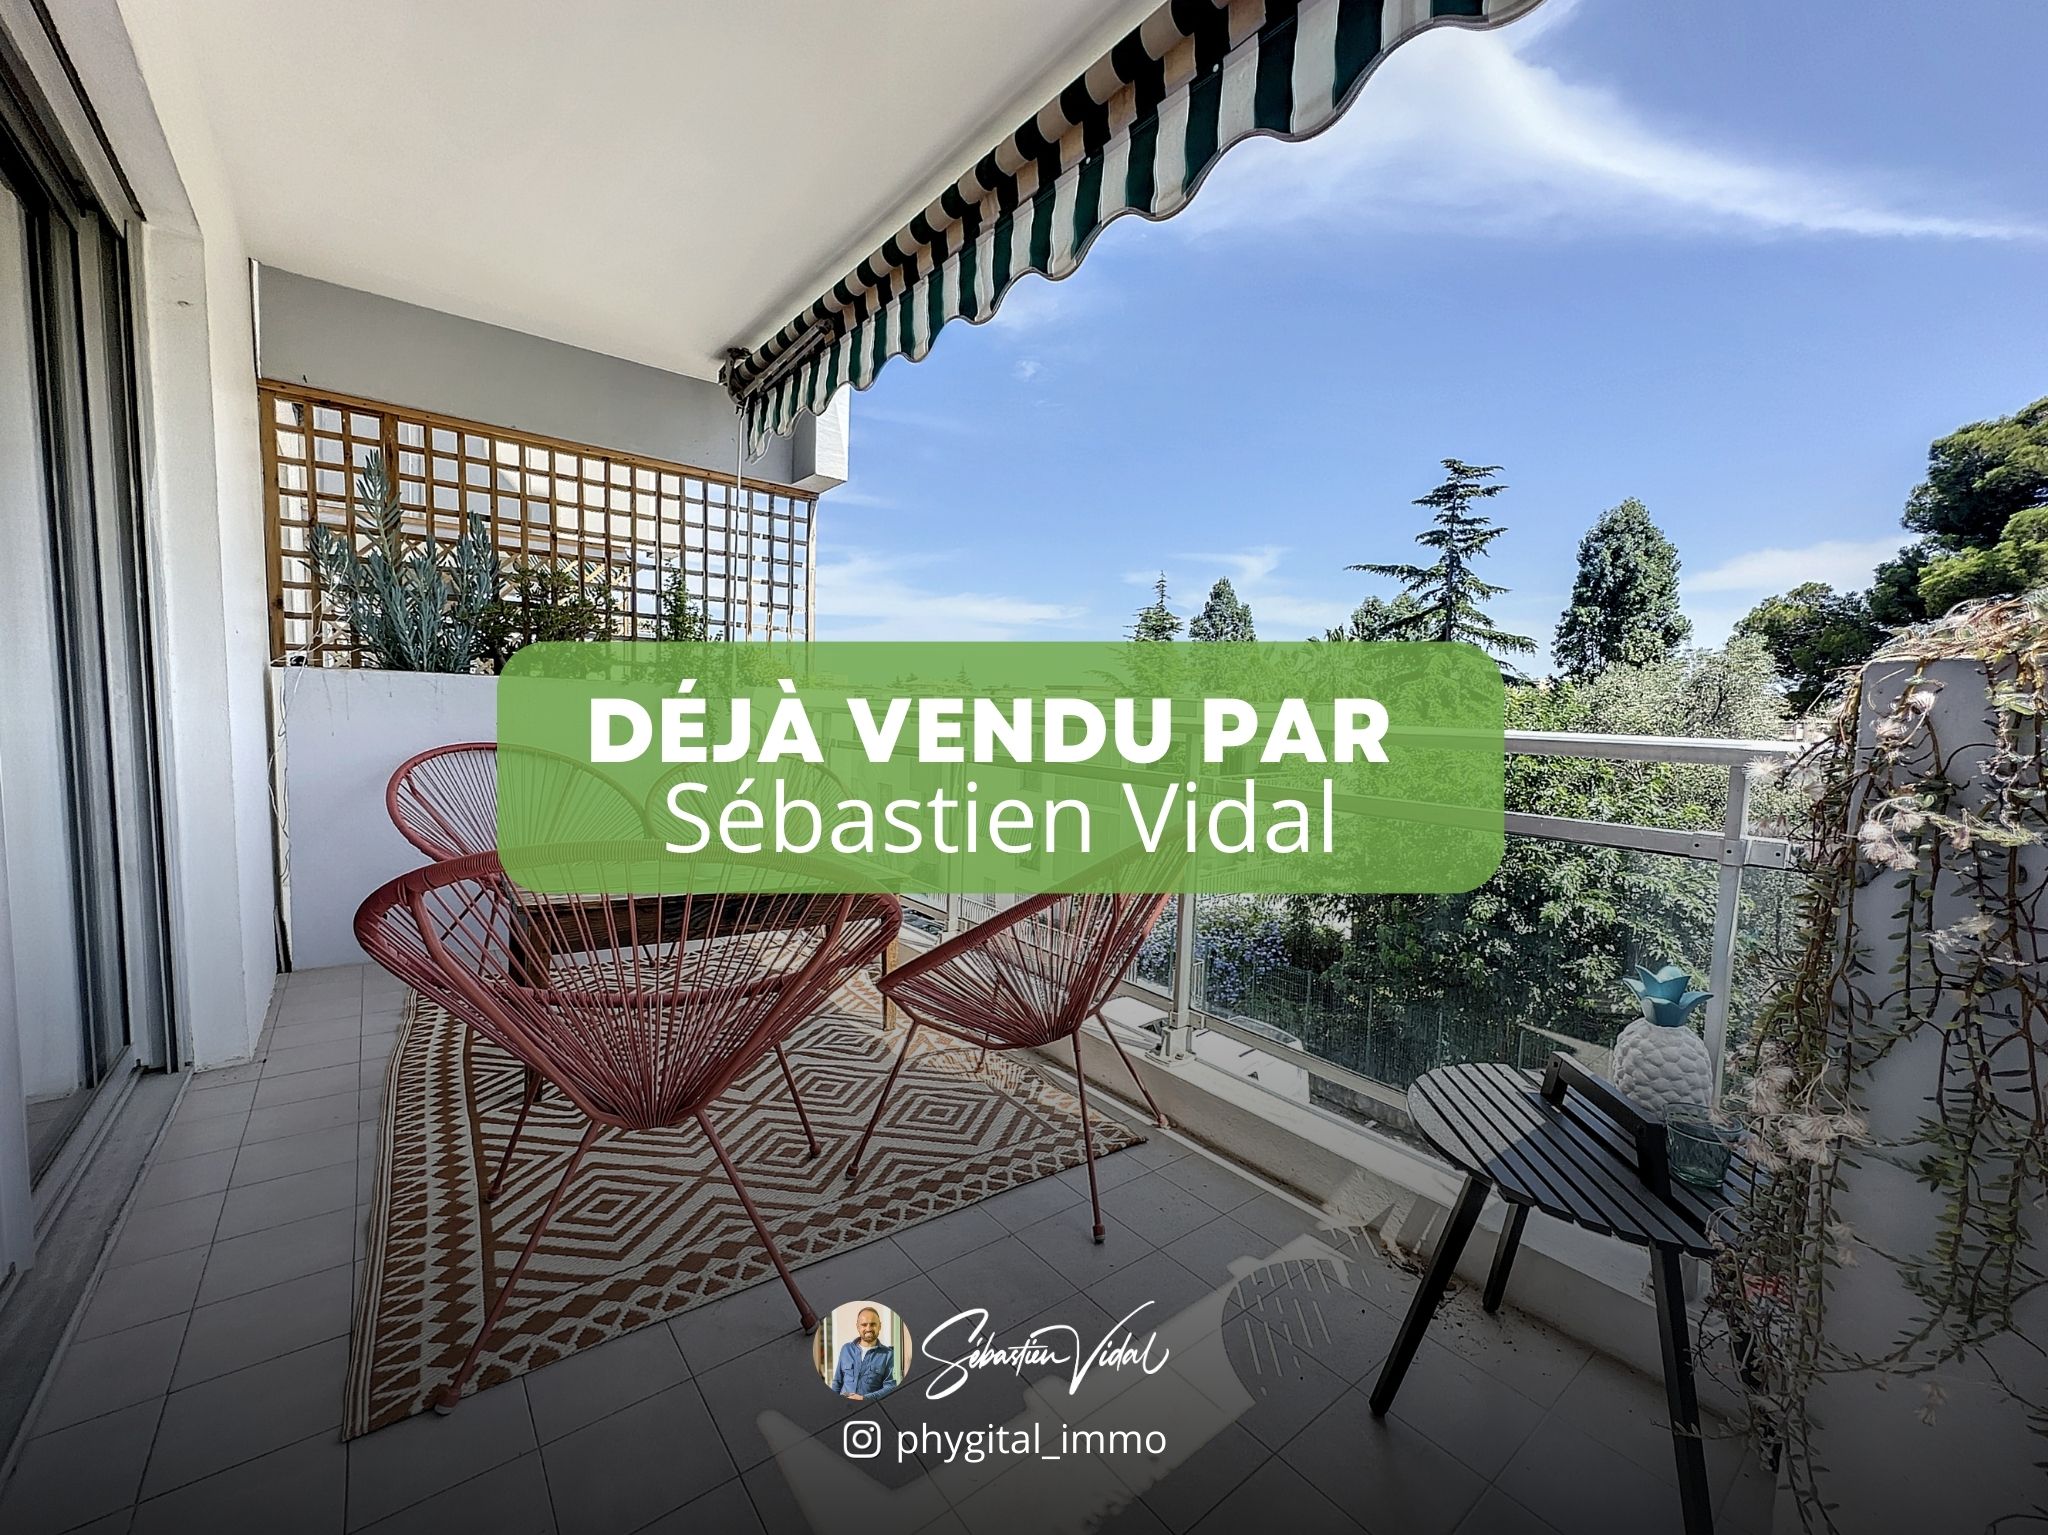 Vente Appartement 78m² 4 Pièces à Antibes (06600) - Phygital.Immo